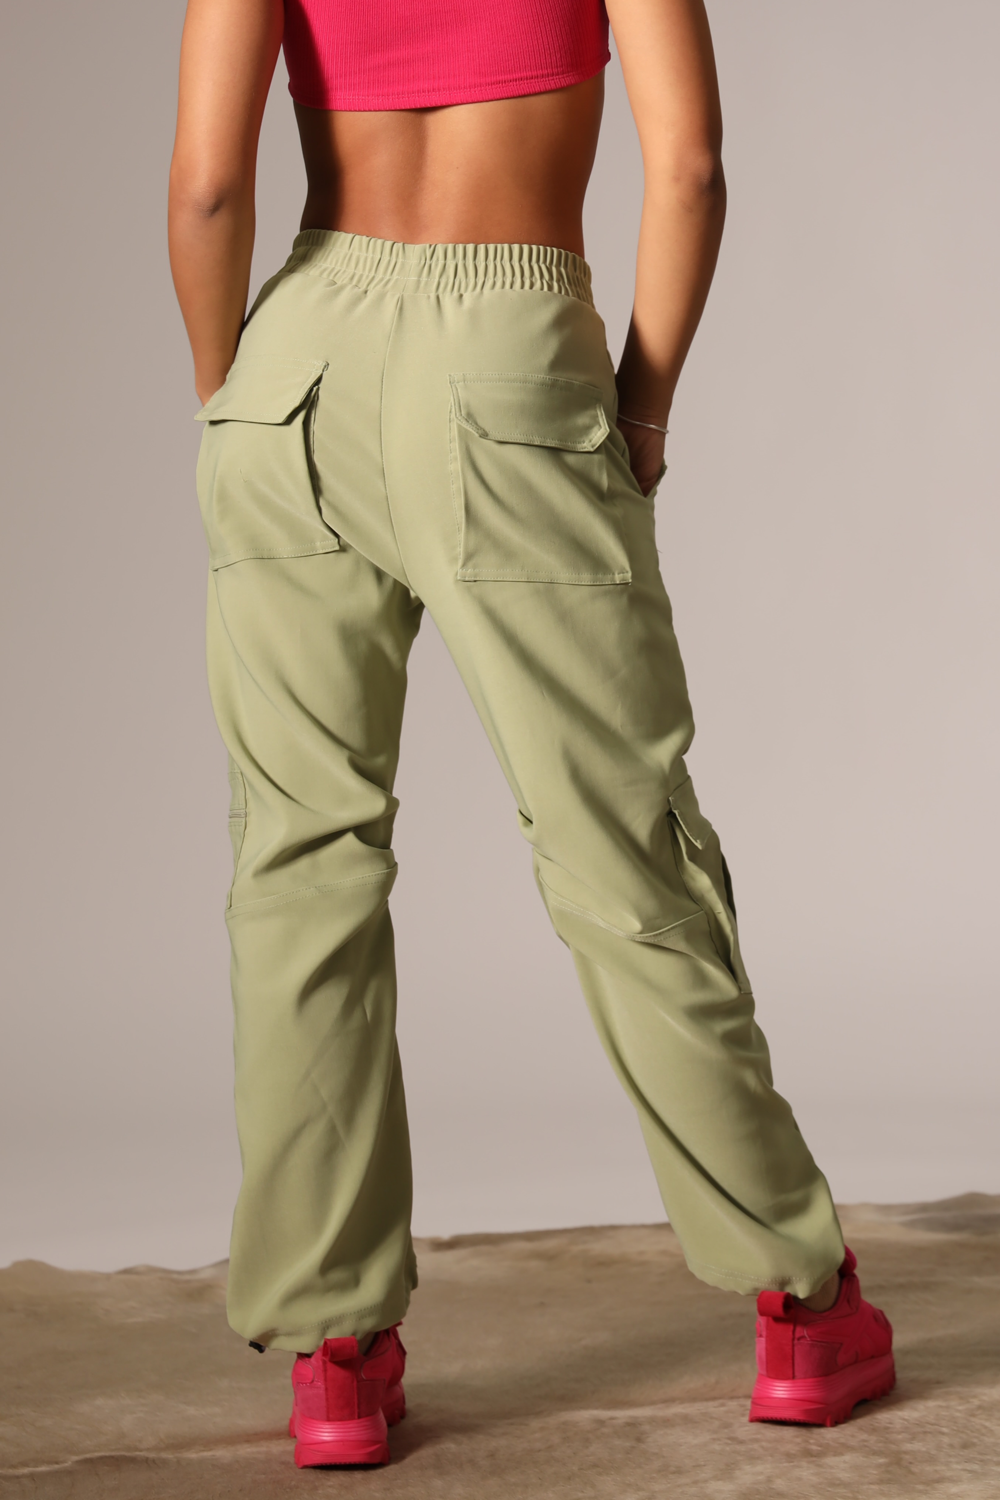 Women Dance Practice Trousers / Pants / Shorts – tagged 6-height_164-170-cm  – Dance Dressing